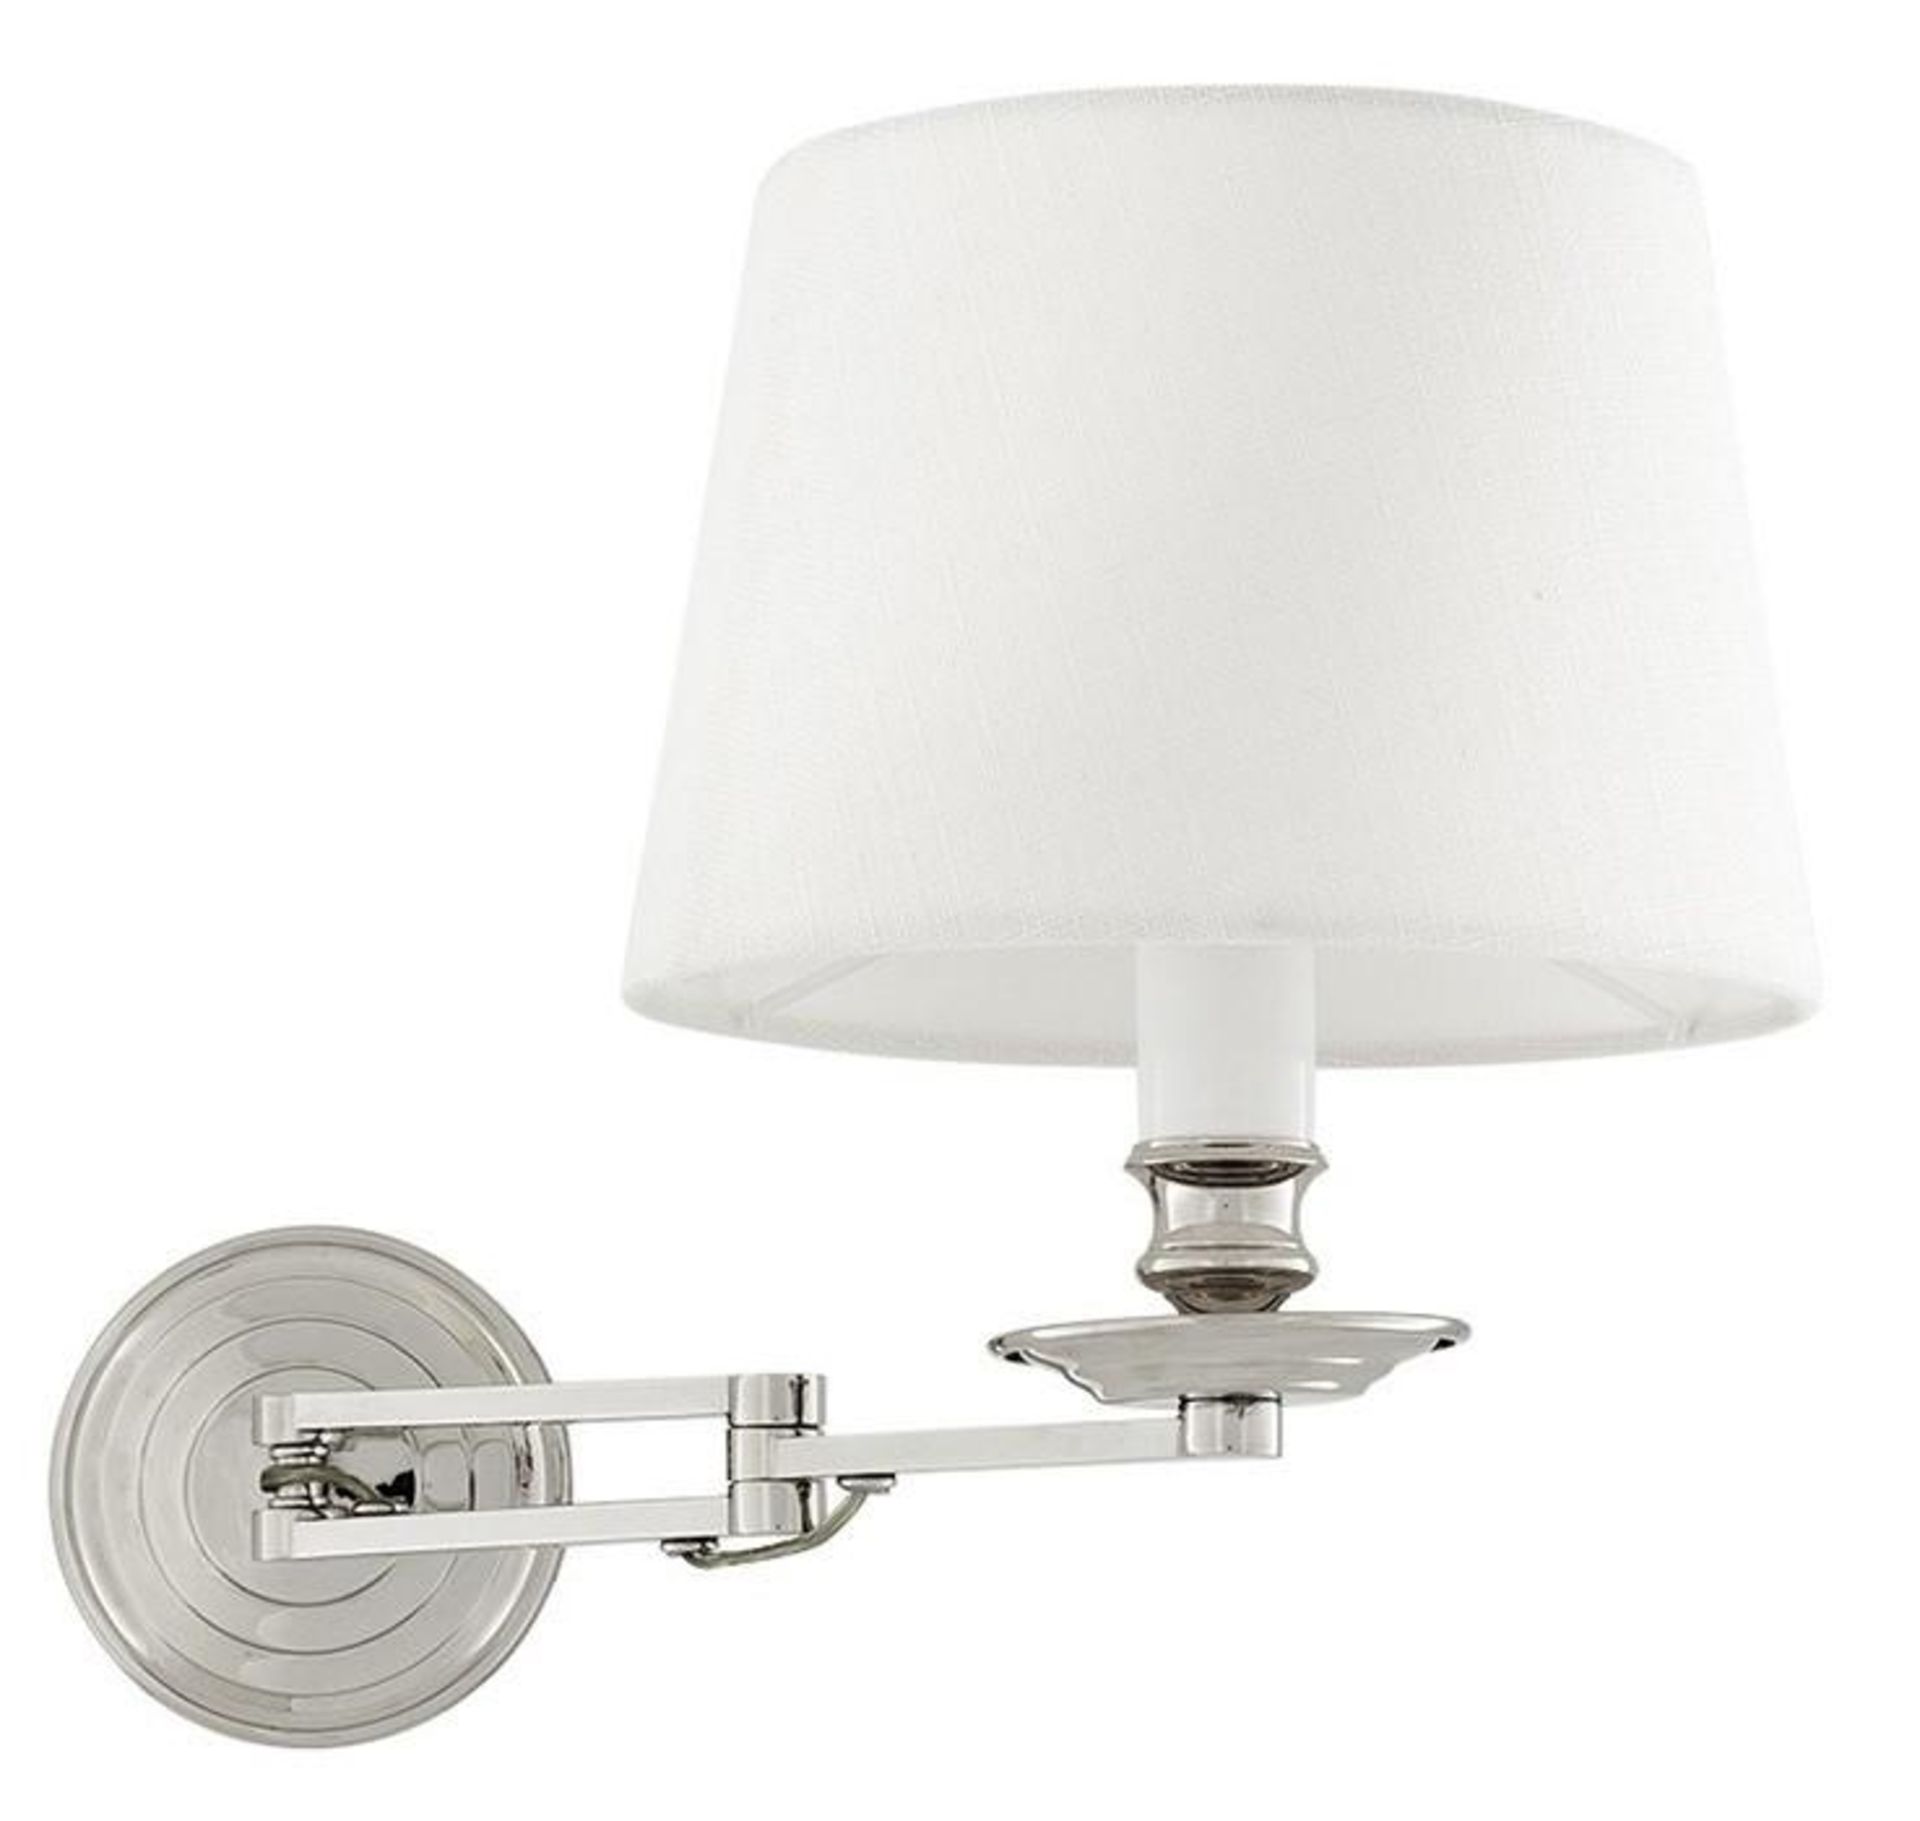 1 x EICHHOLTZ "Eclipse" Artisan Crafted Wall Lamp With White Shade - Features An Adjustable Arm, And